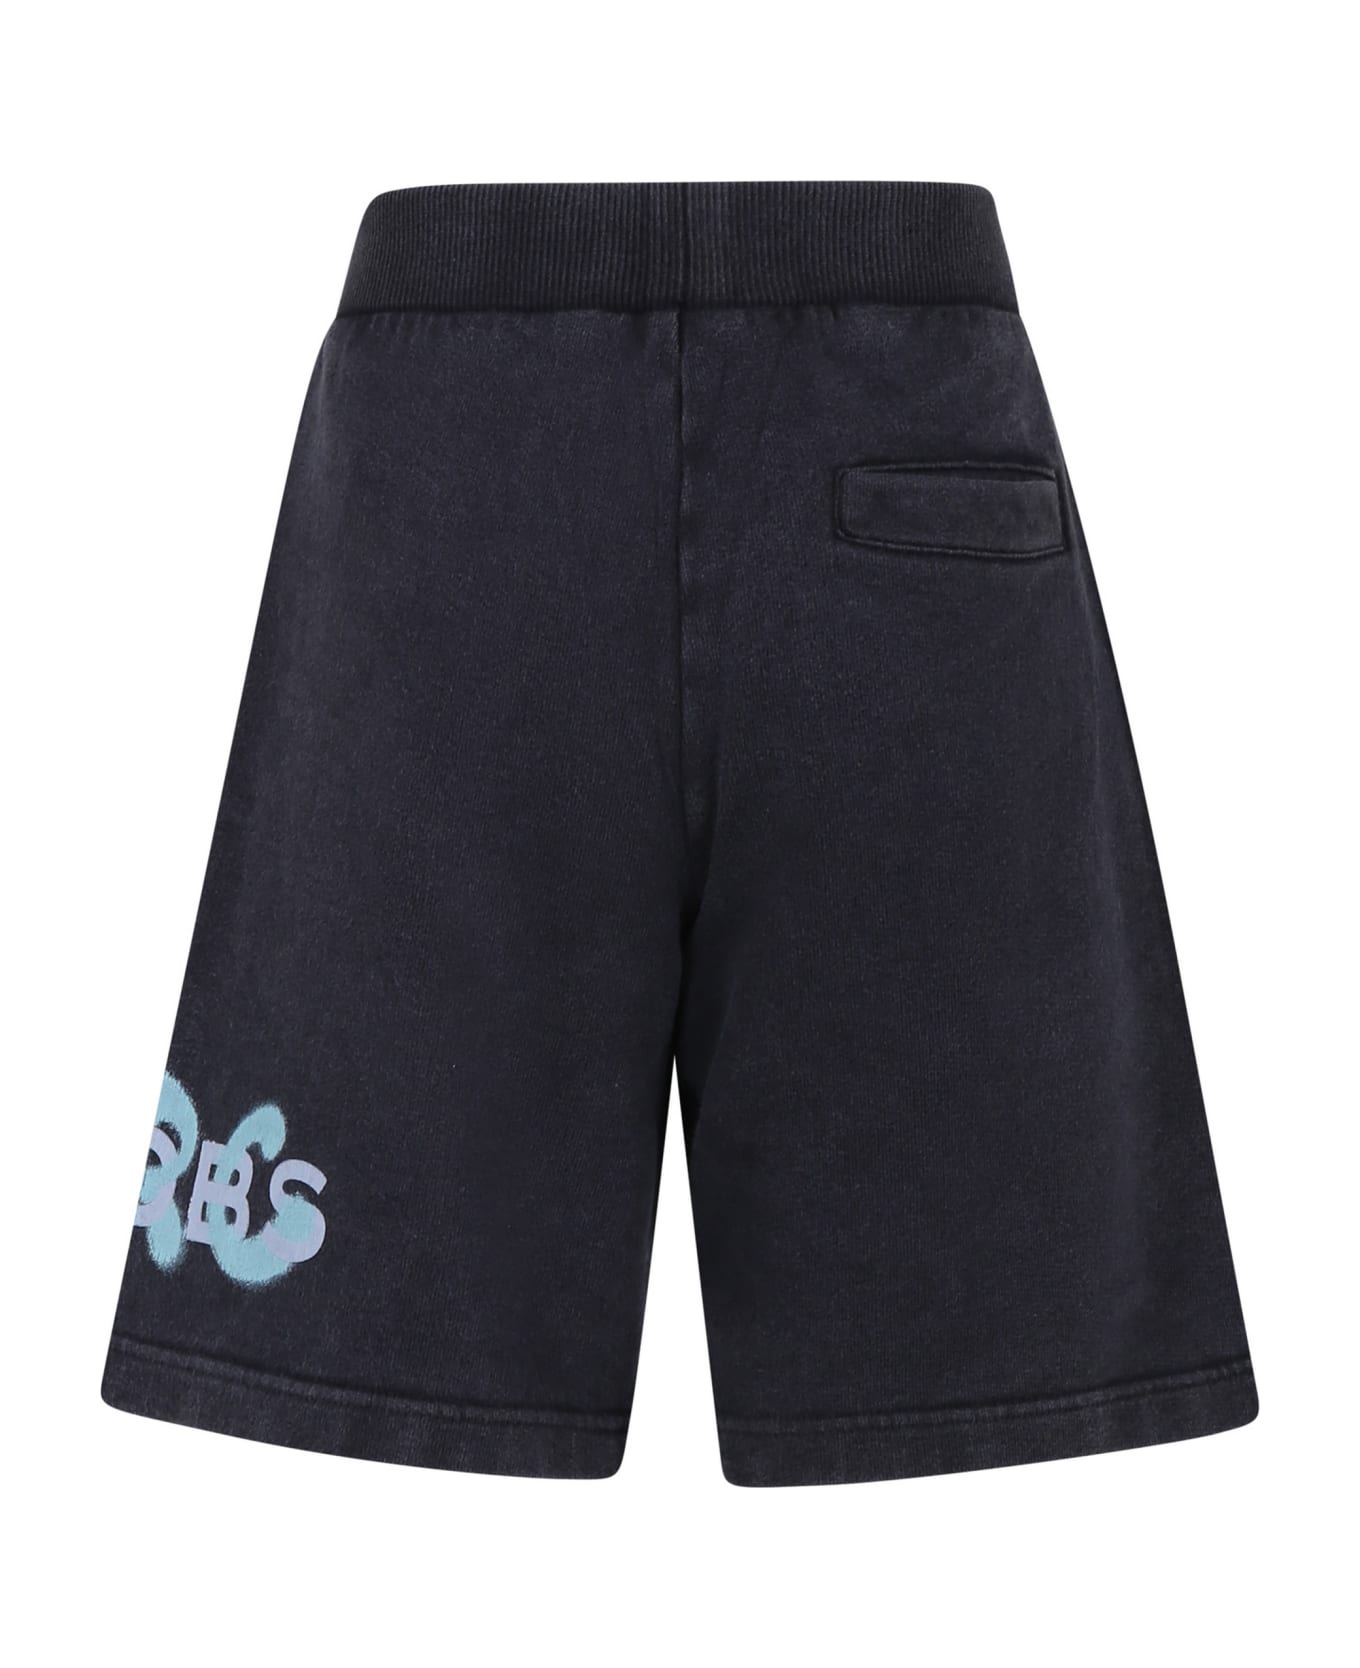 Little Marc Jacobs Black Shorts For Boy With Logo - Black